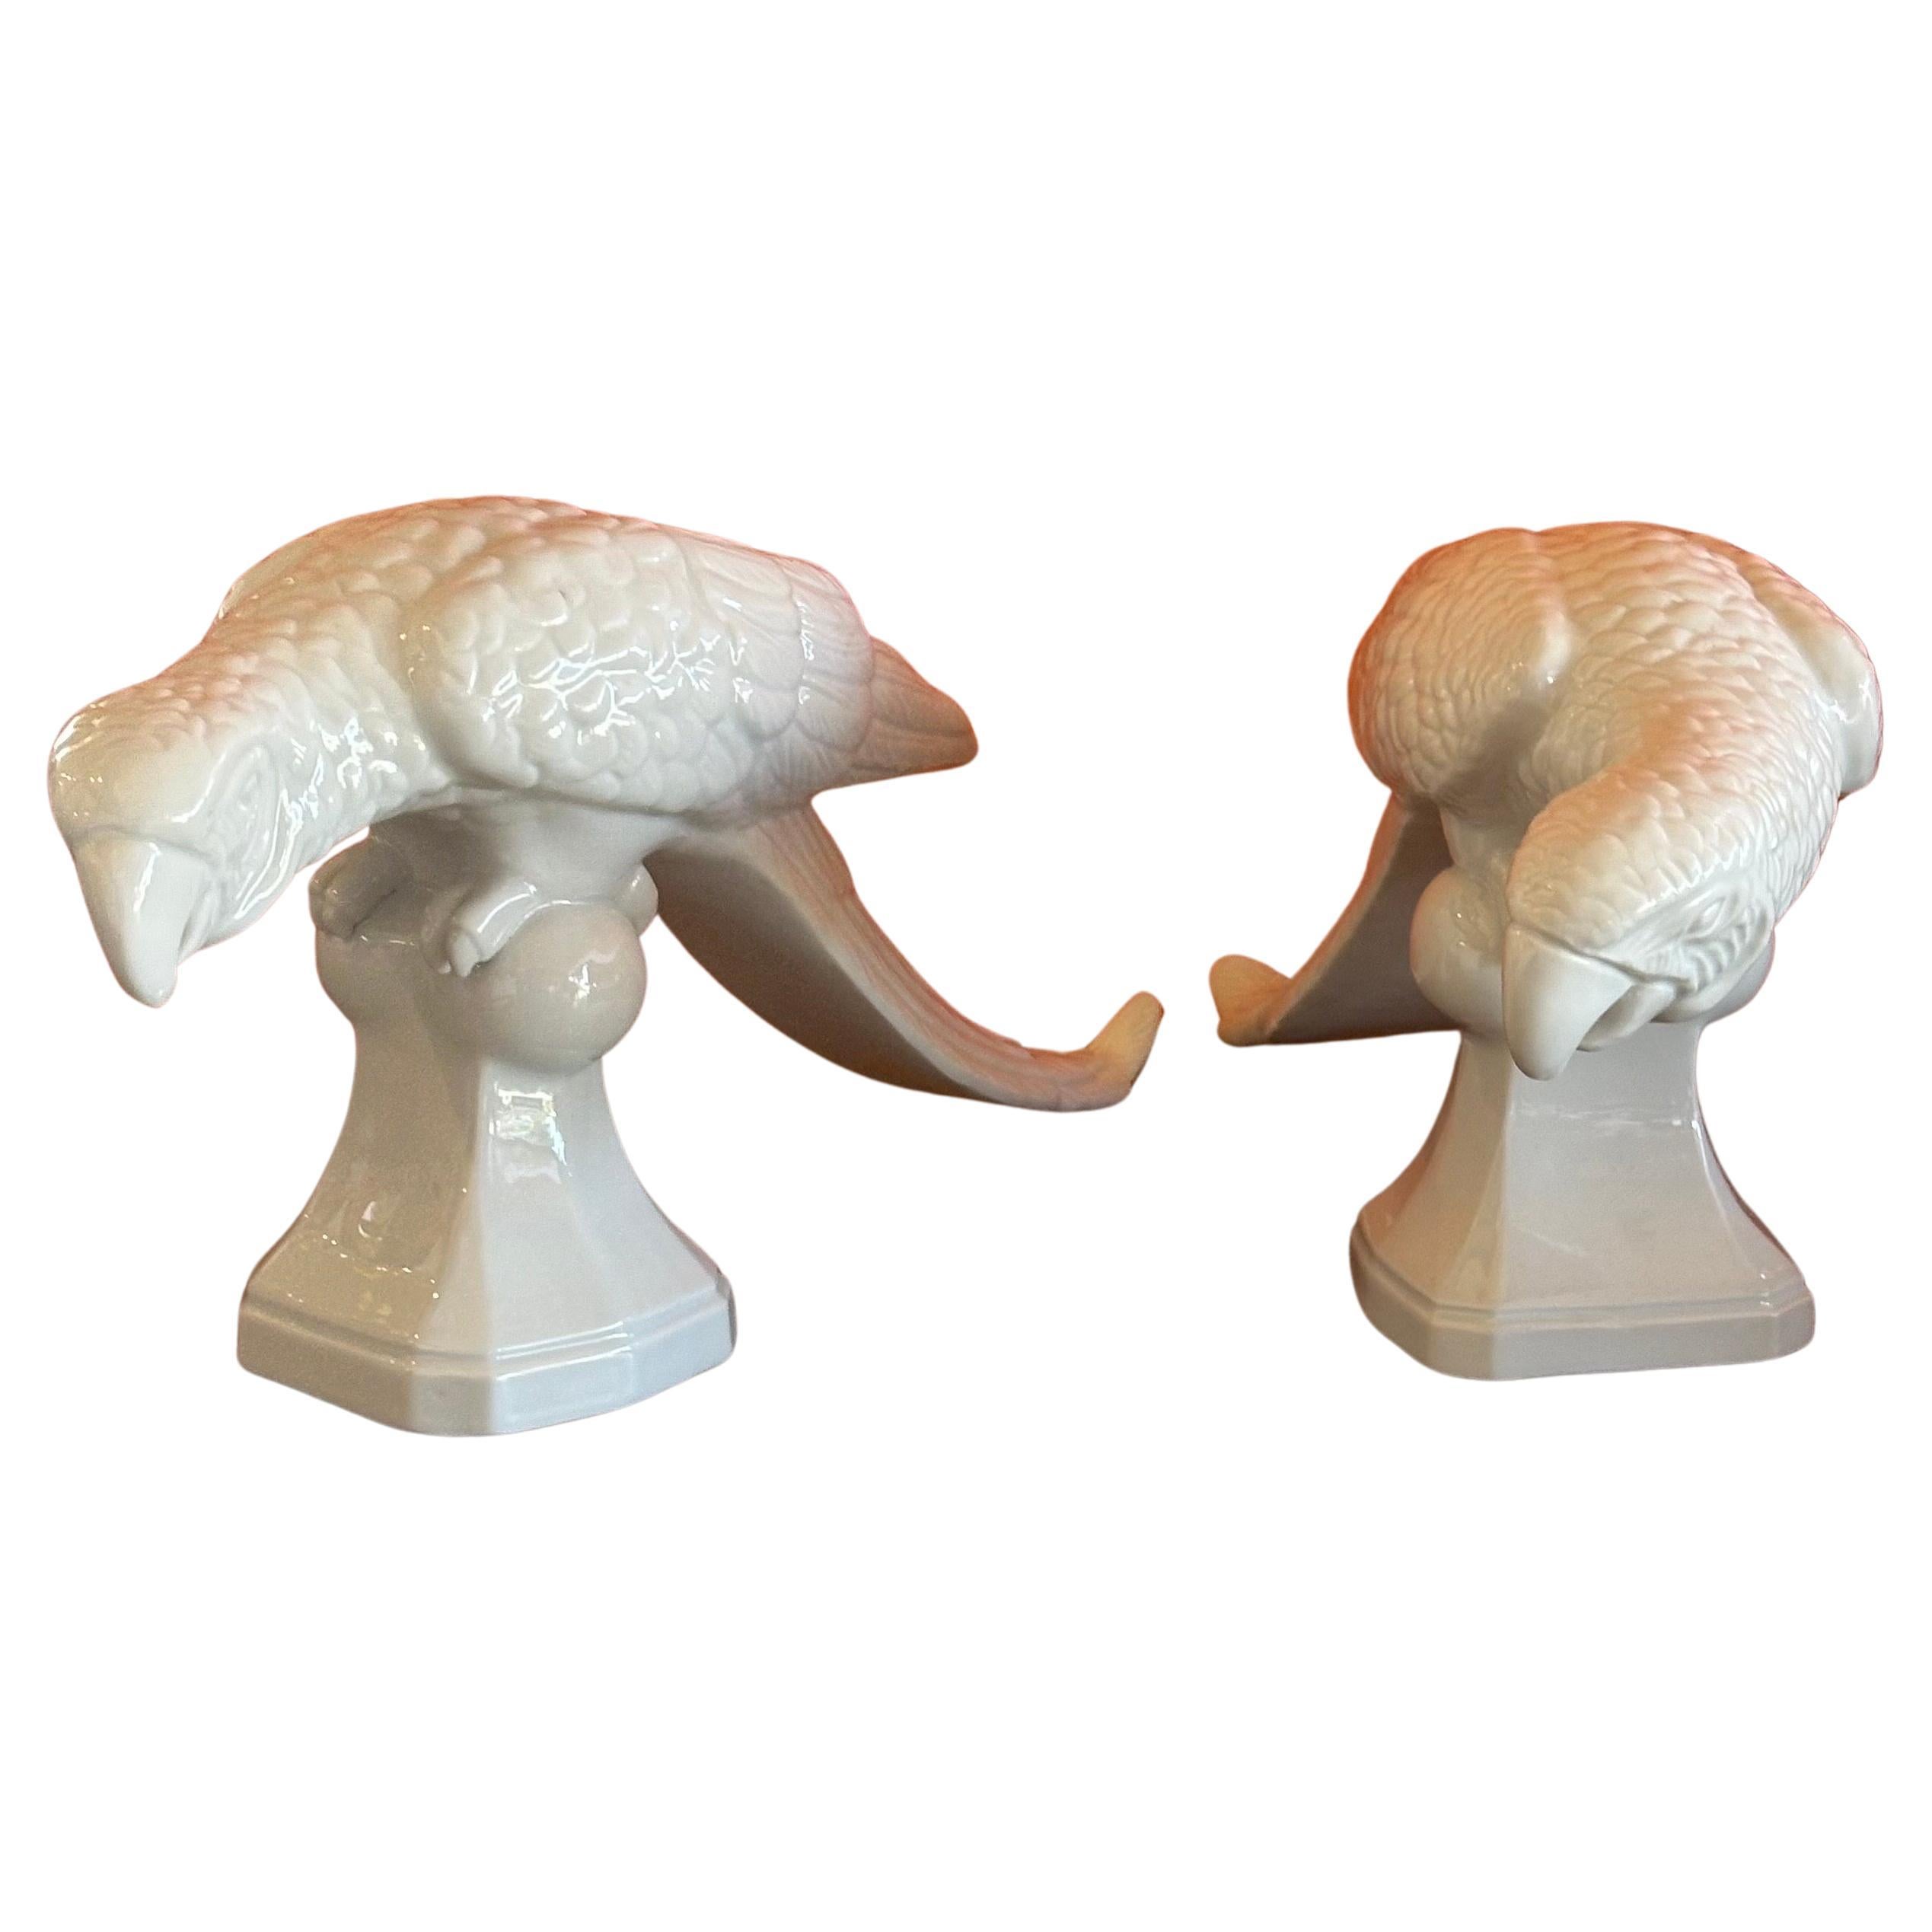 Classic white porcelain / chine de blanc parrot sculptures by Fitz & Floyd, circa 1970s.  The pair are in very good vintage condition with no chips, cracks or crazing; each parrot measures approximately 4.5